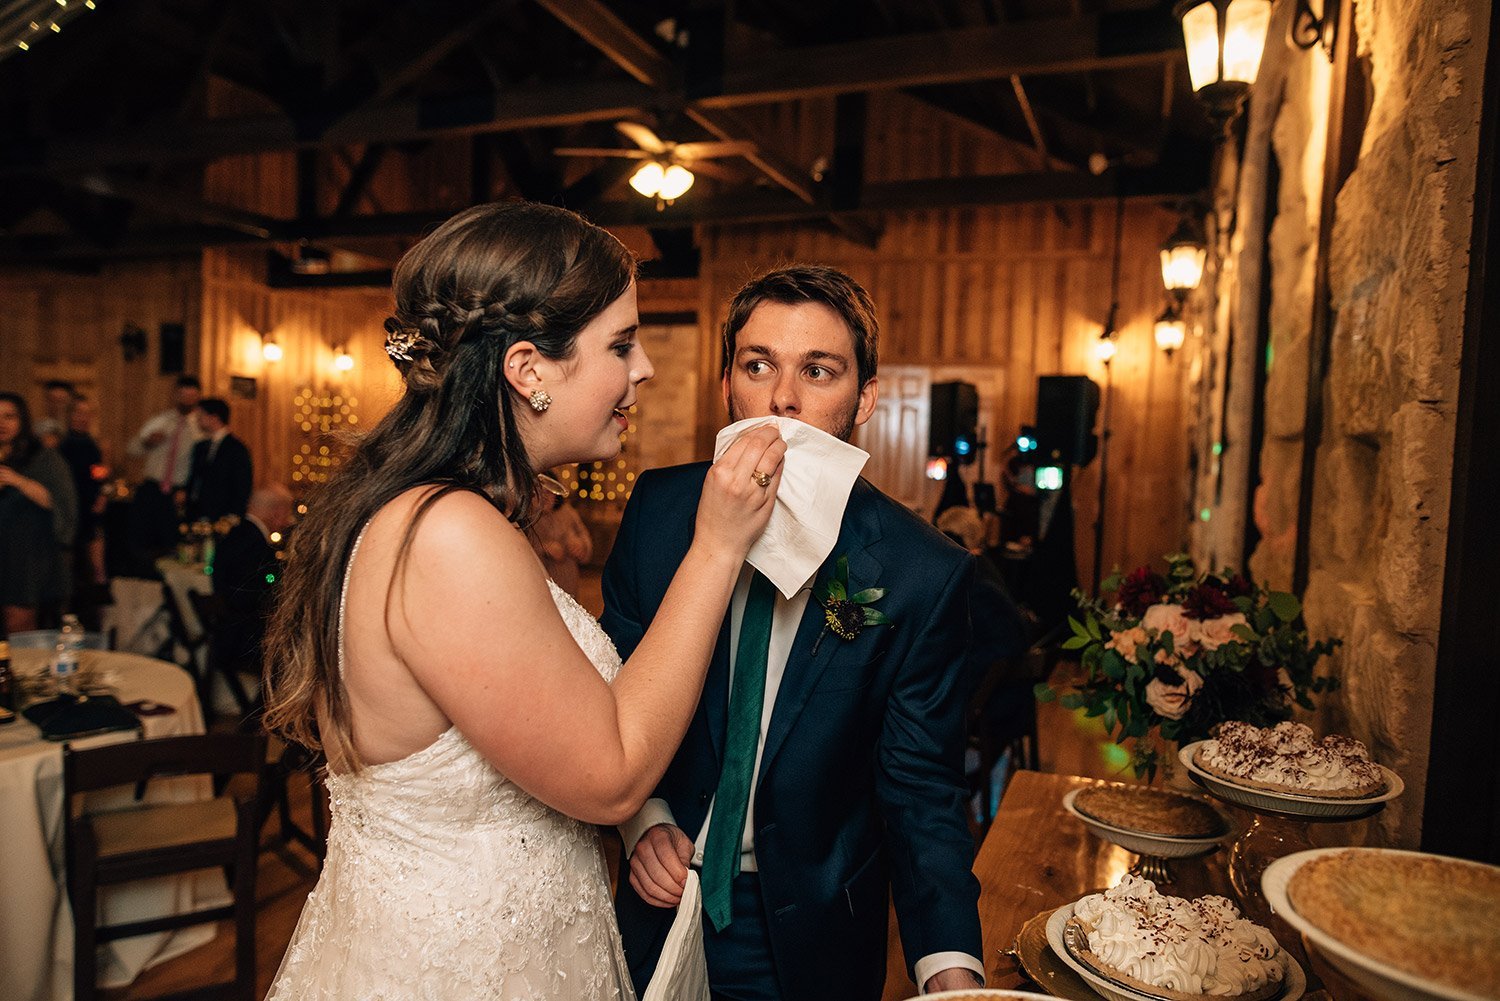 bride wiping grooms mouth after cutting pie instead of cake